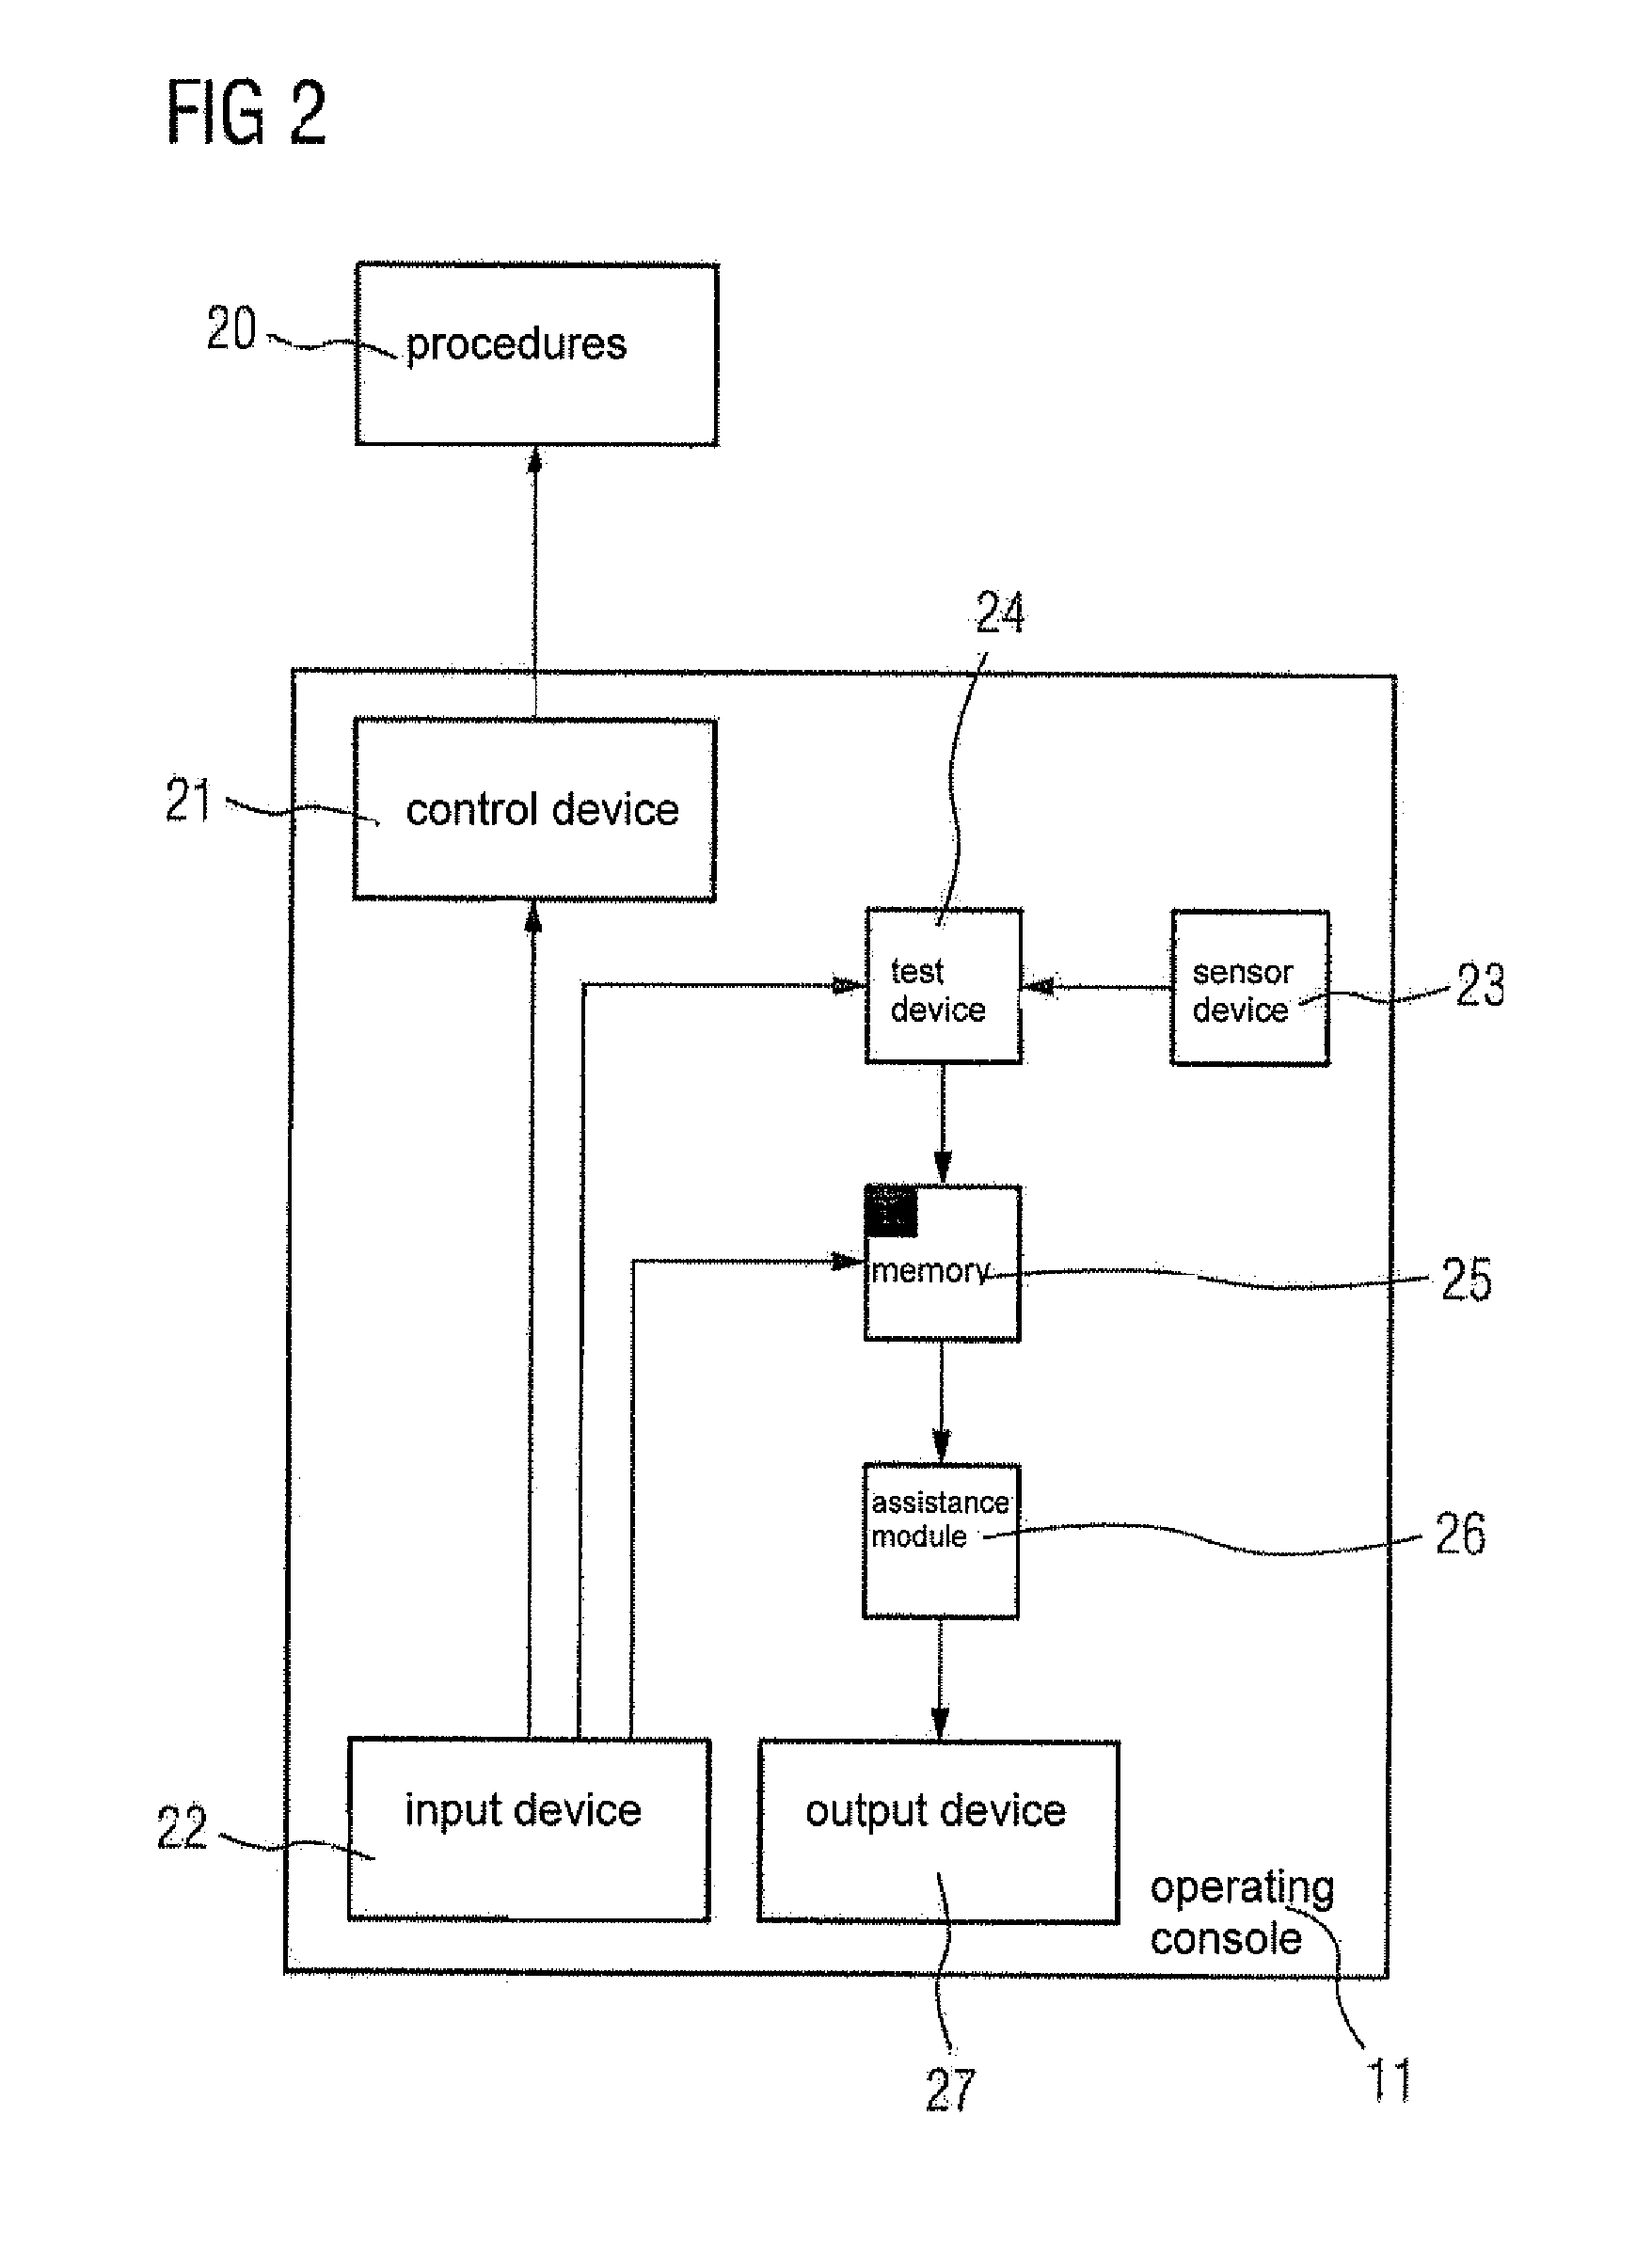 Medical apparatus for diagnosis or treatment